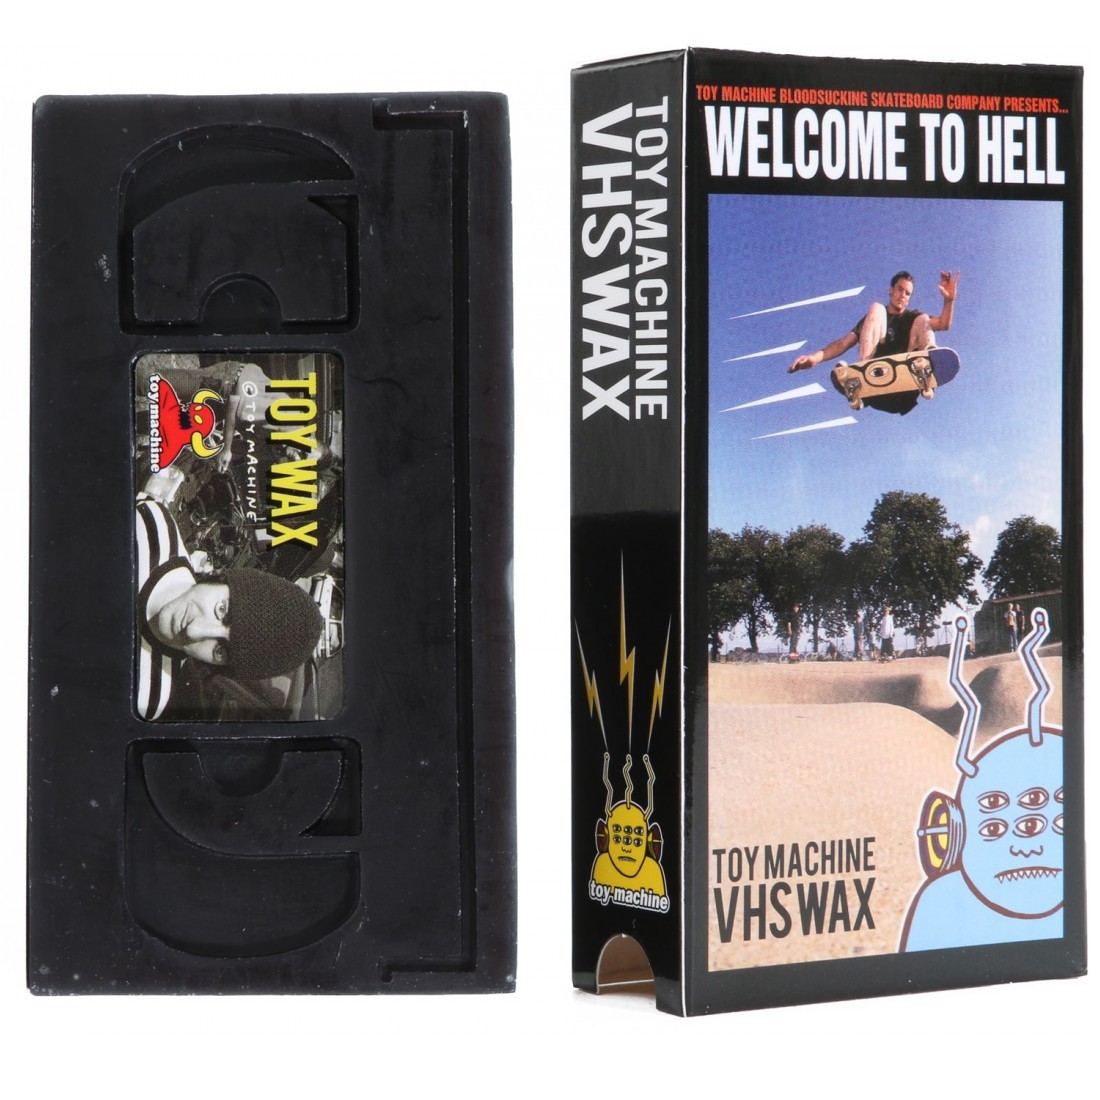 Toy Machine VHS Wax - Welcome to hell